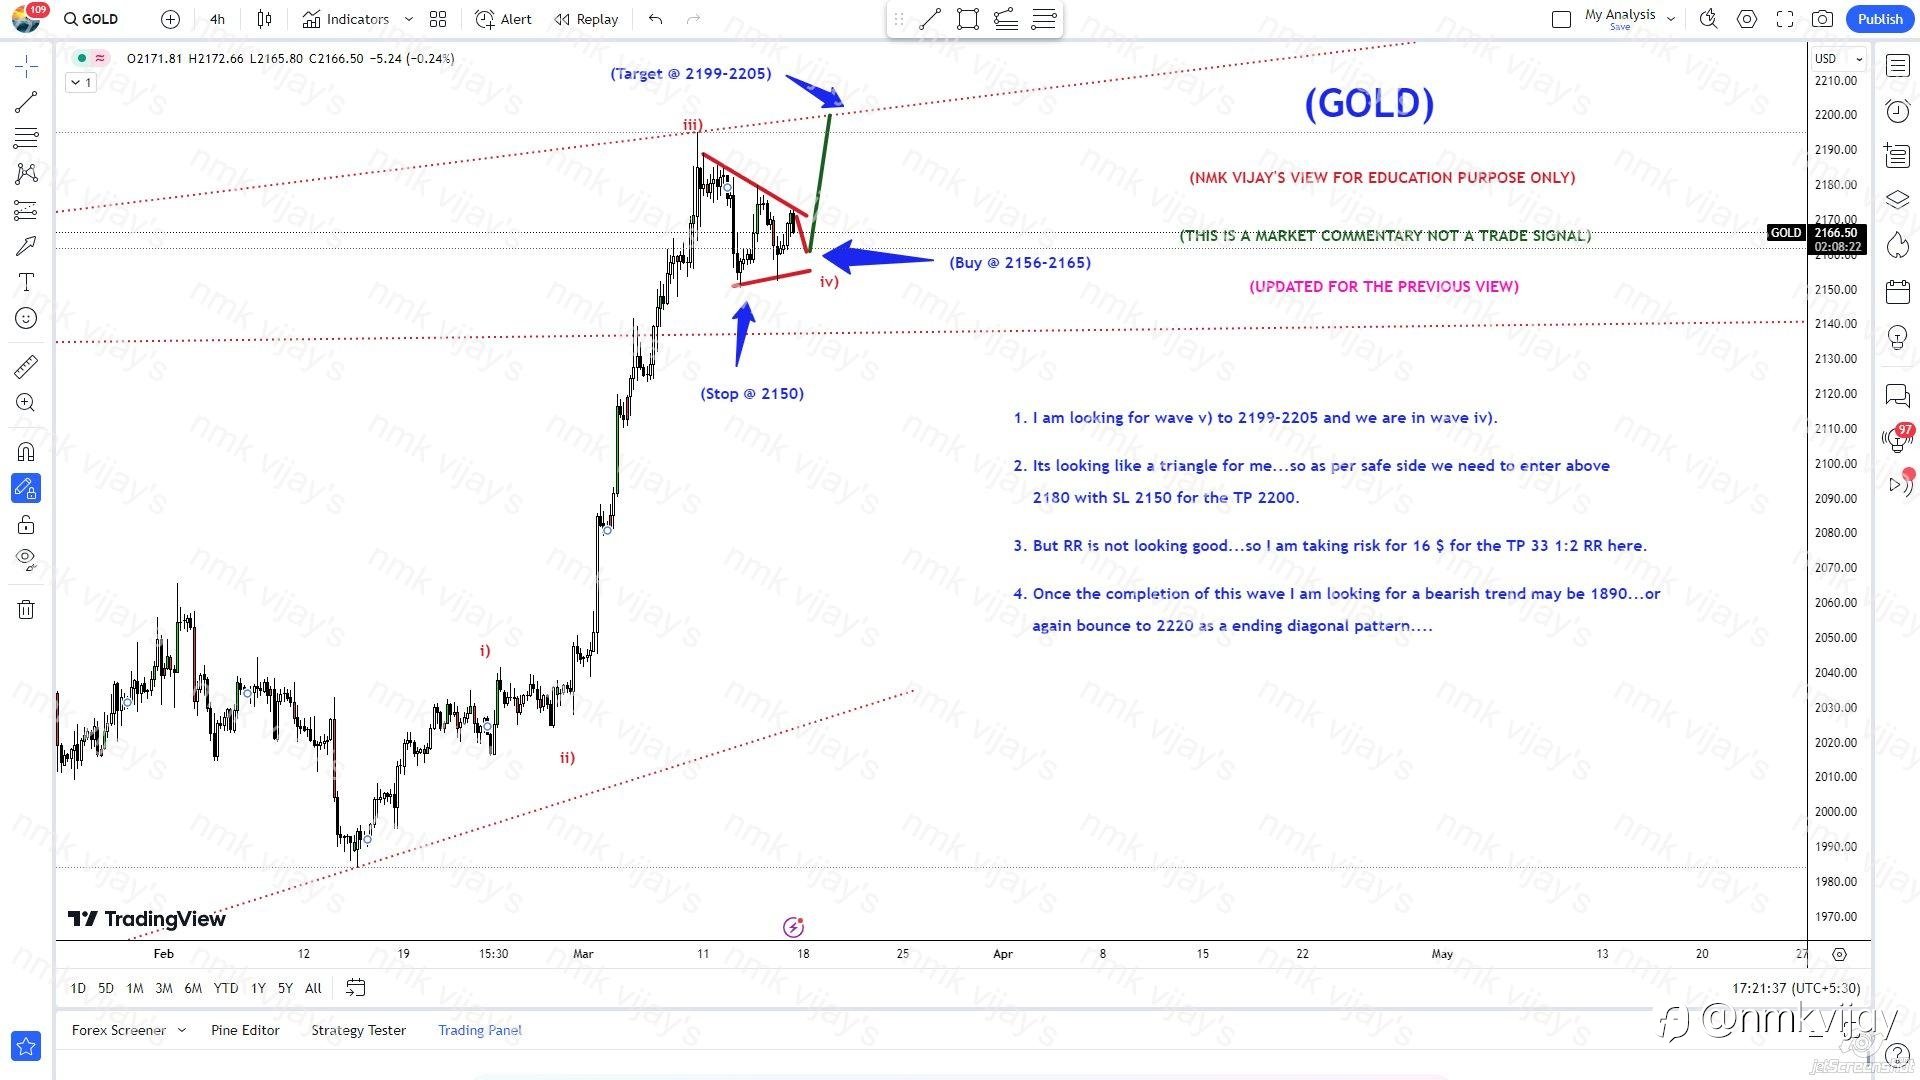 GOLD: Still one more wave v) to 2200? wave iv) triangle ?